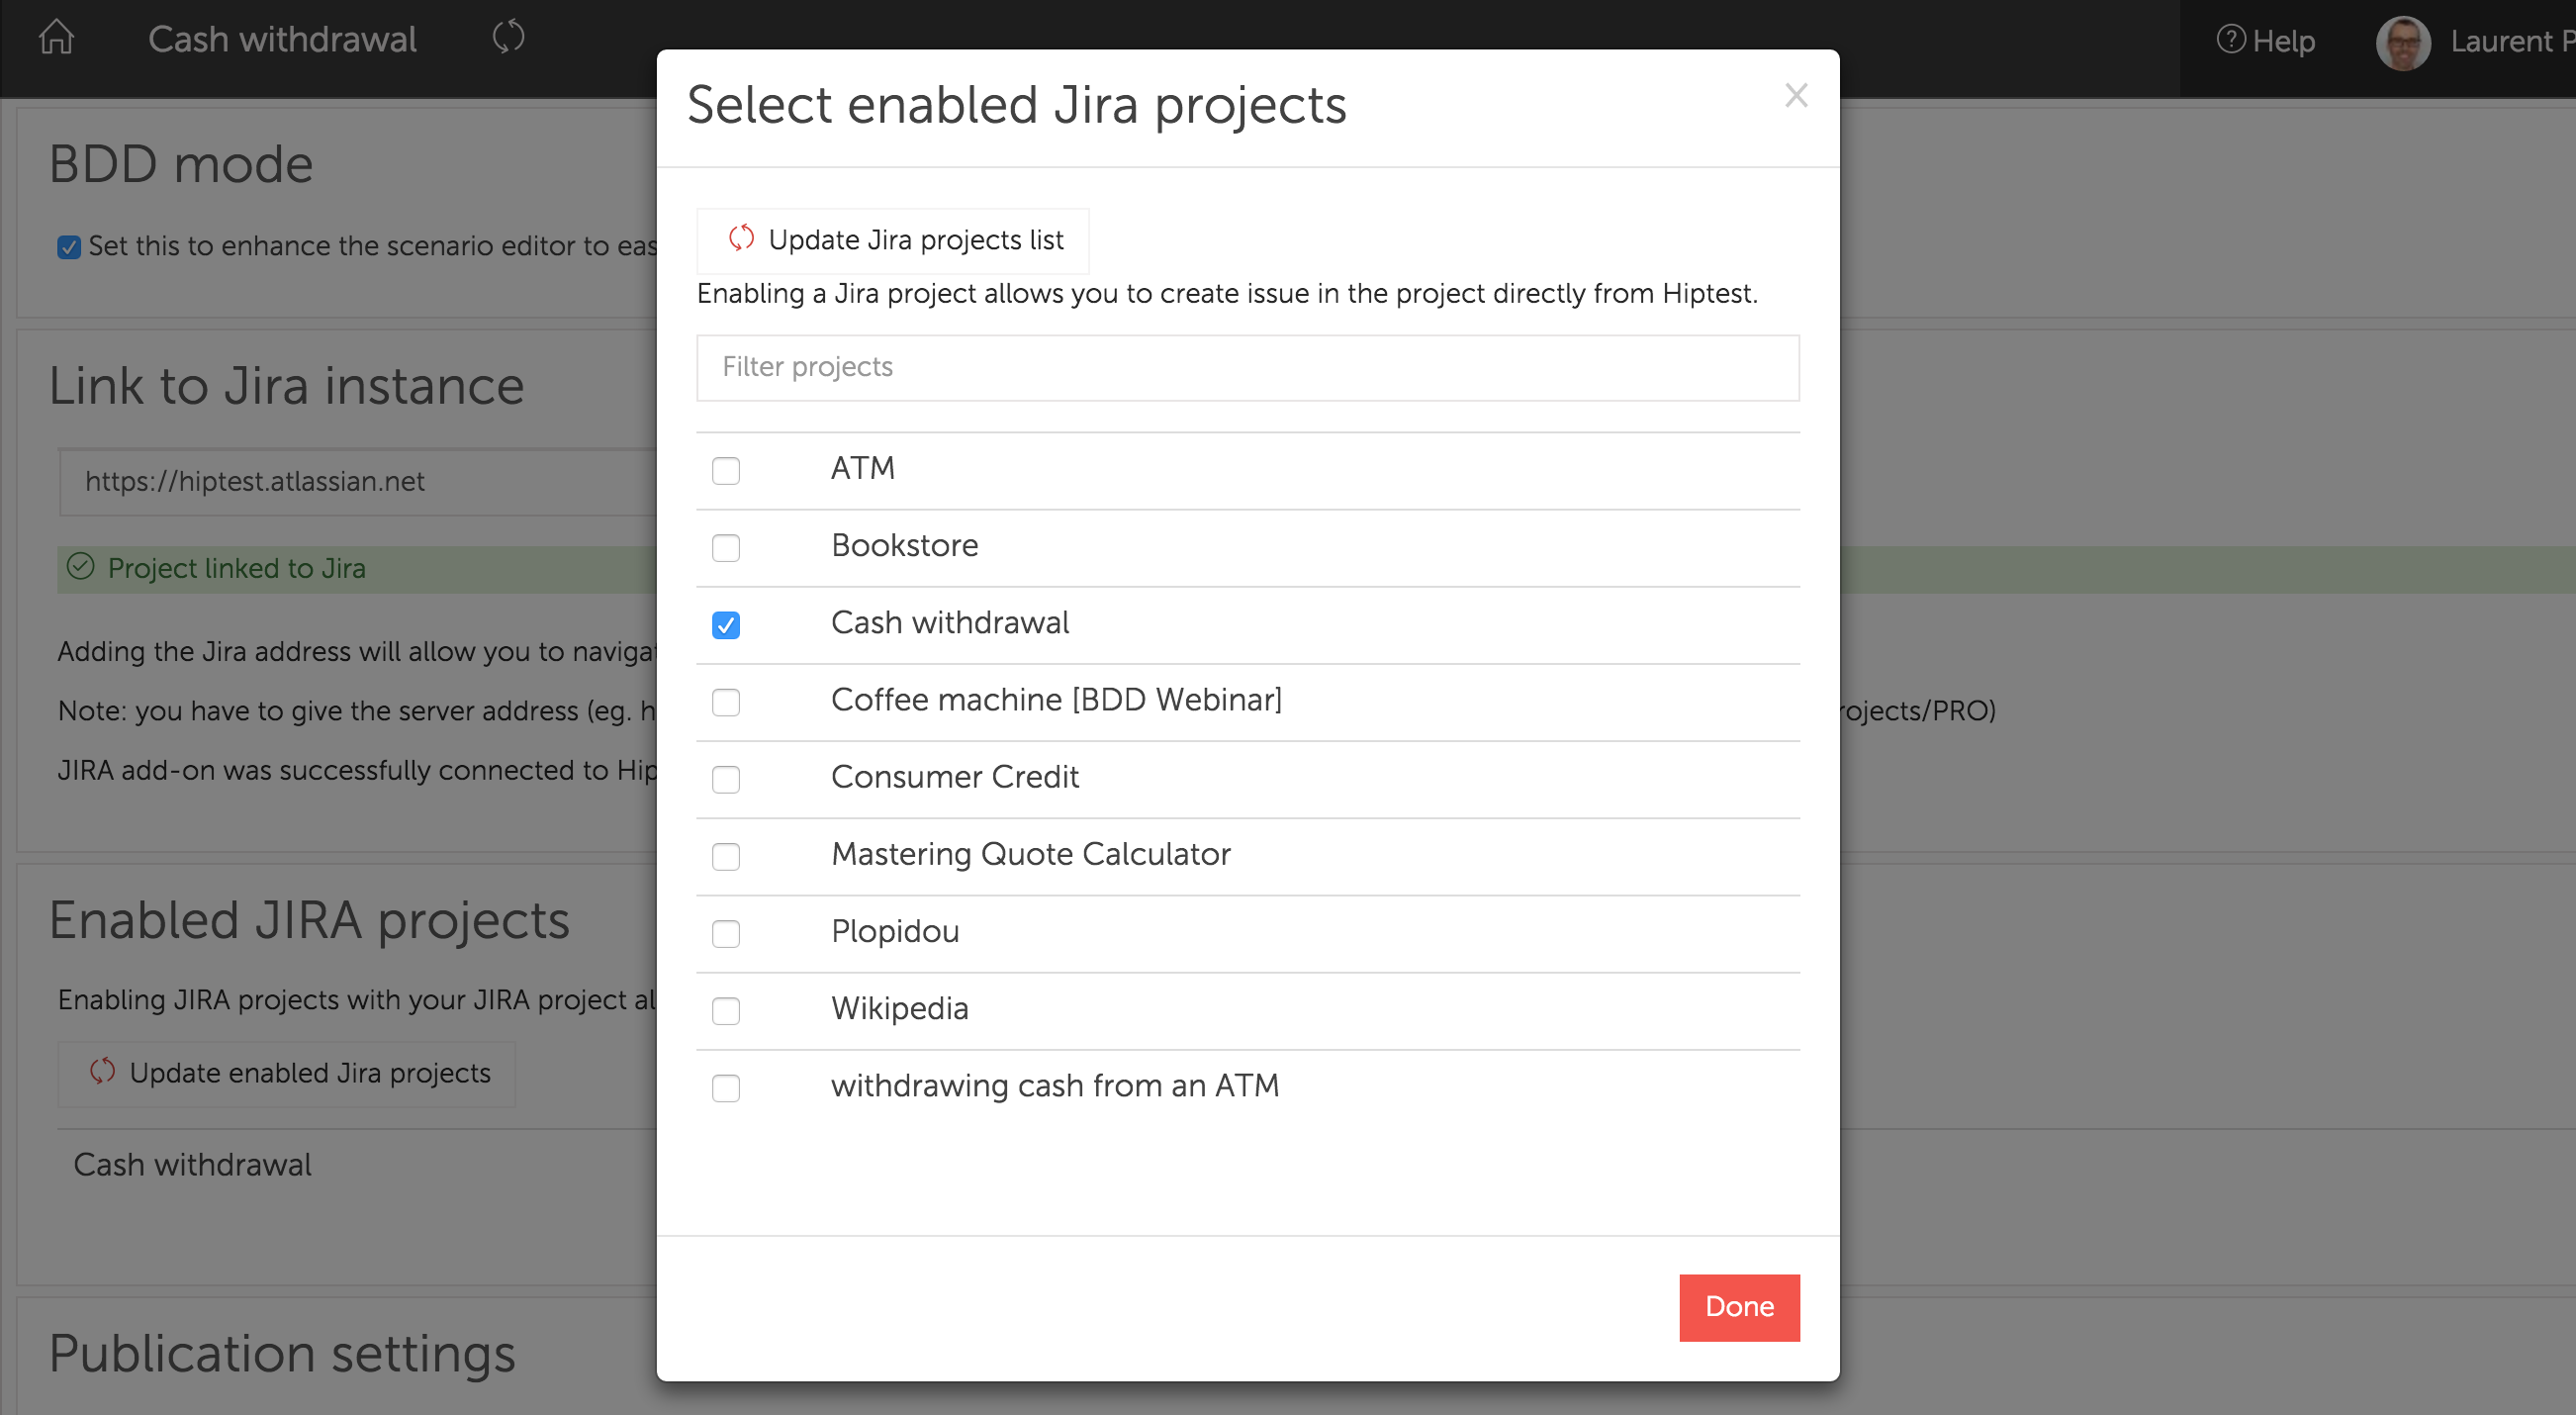 Select enabled Jira projects